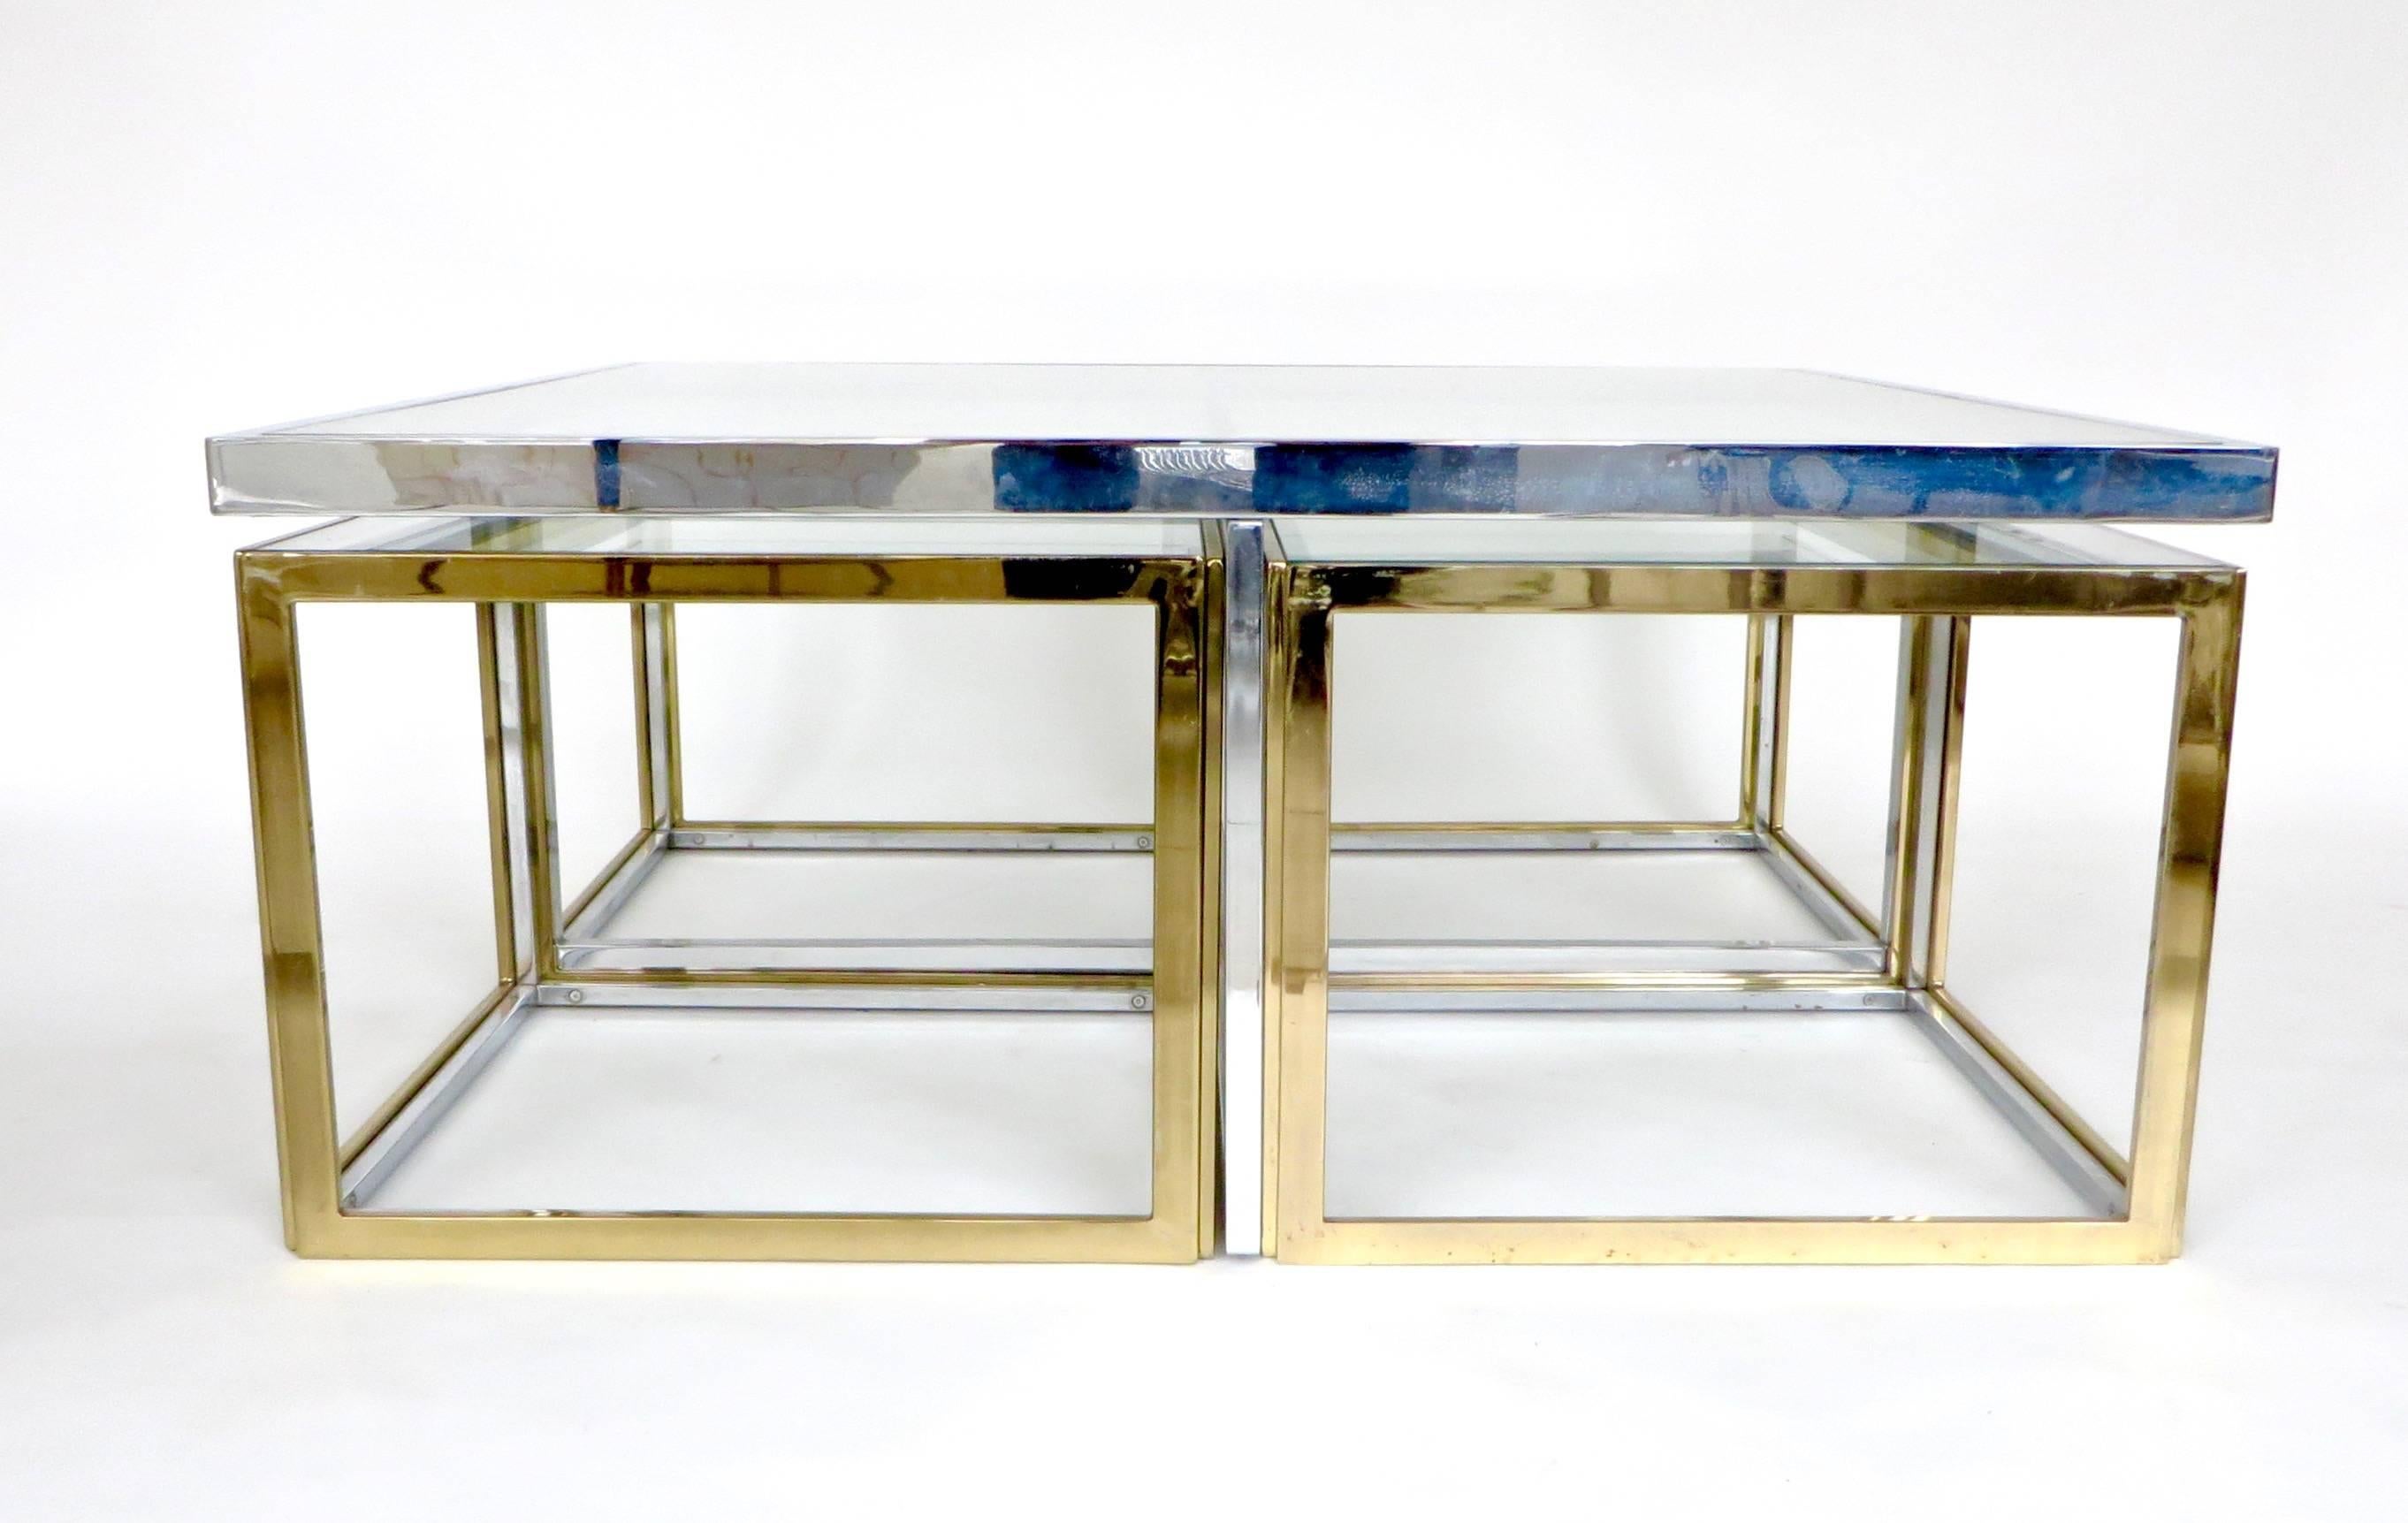 French Maison Jansen large inset glass topped coffee table consisting of one main table with four pull-out smaller tables with inset glass.
A French coffee table from the 1970s perfectly combining the style of chrome and brass in the same